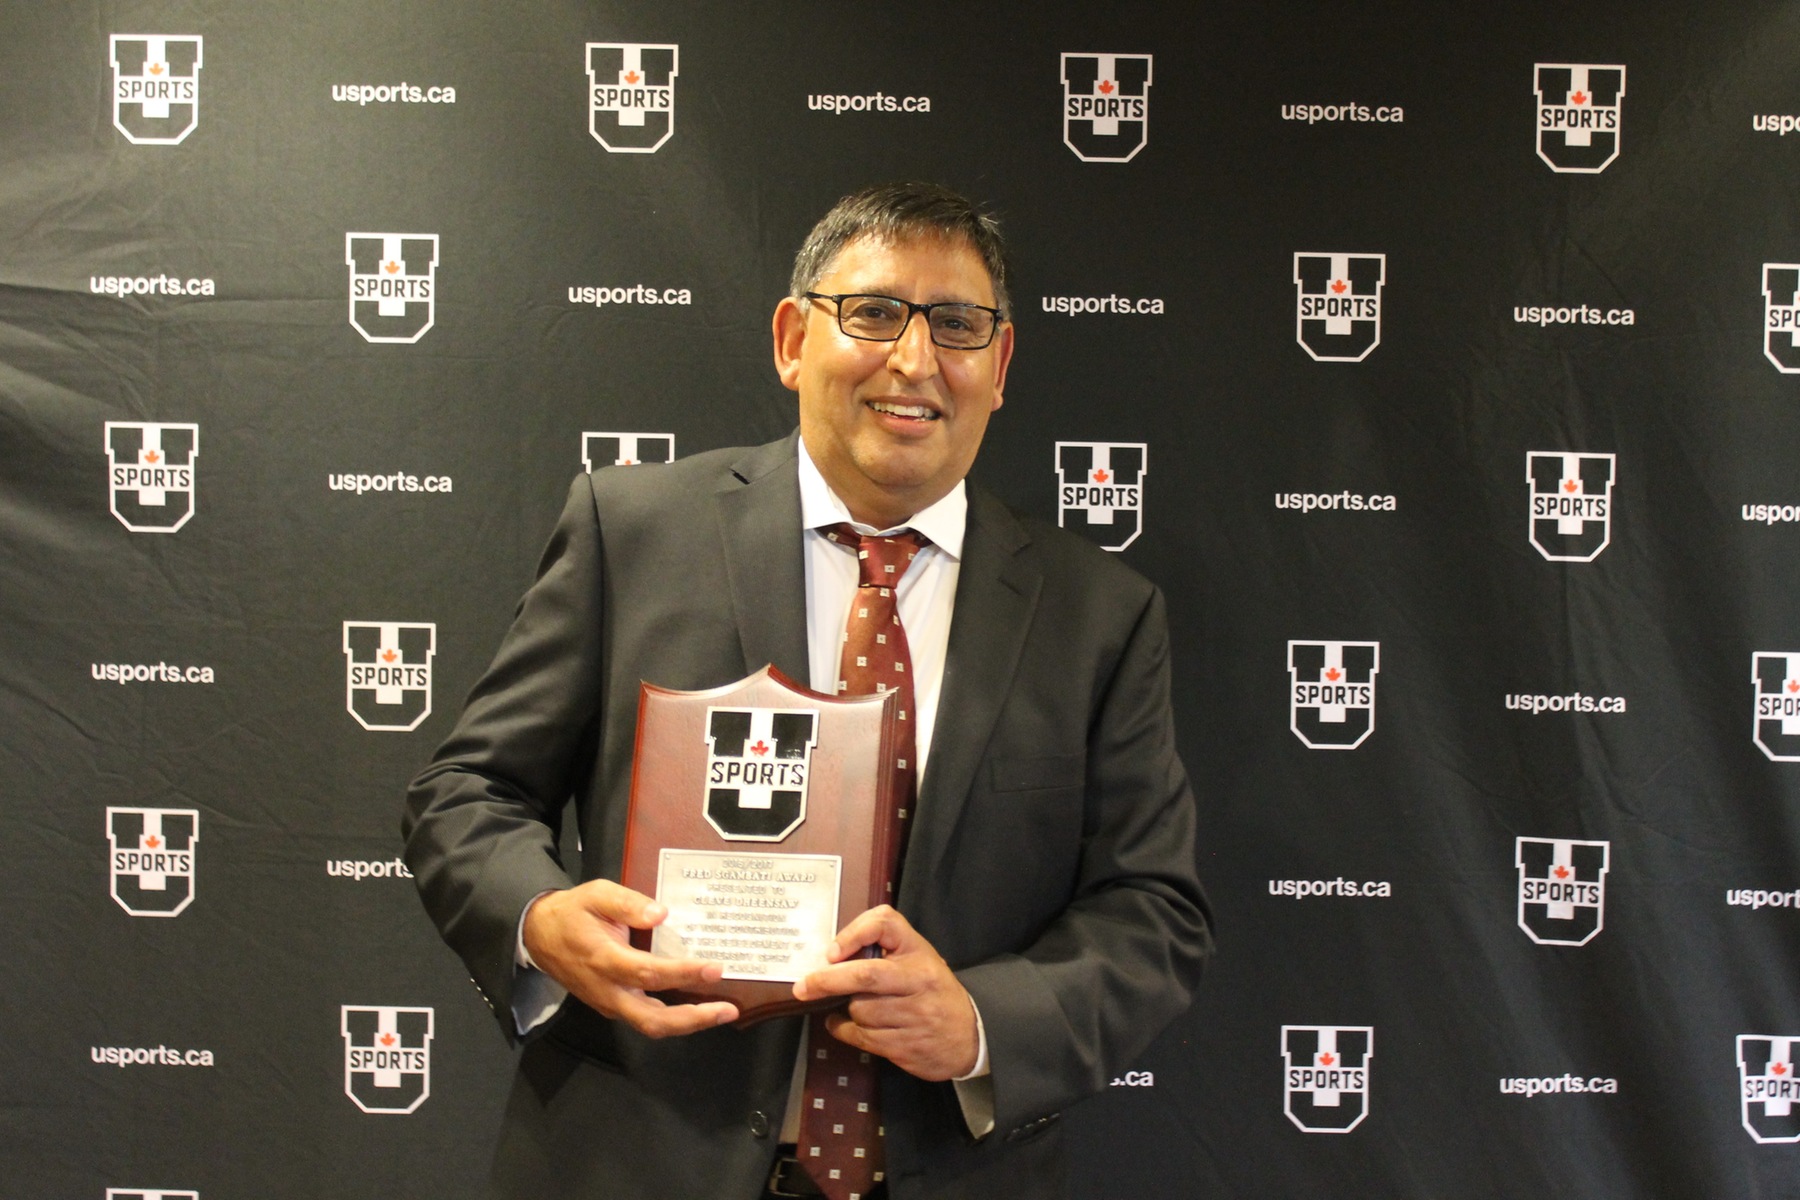 2017 U SPORTS Honours Awards: Victoria Times Colonist’s Dheensaw recognized for his chronicles of Canadian university sport history